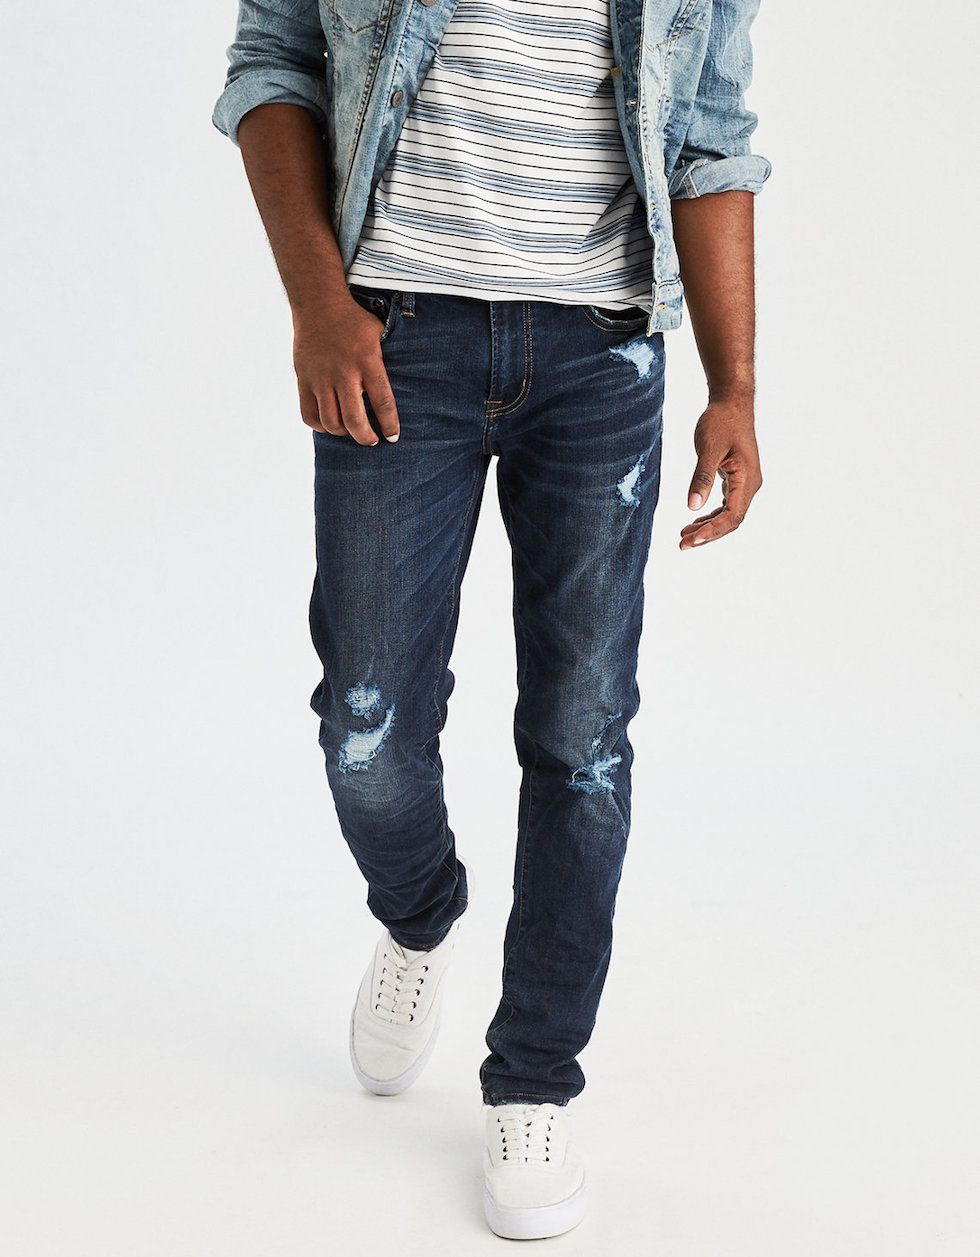 This American Eagle Jeans Sale Means for